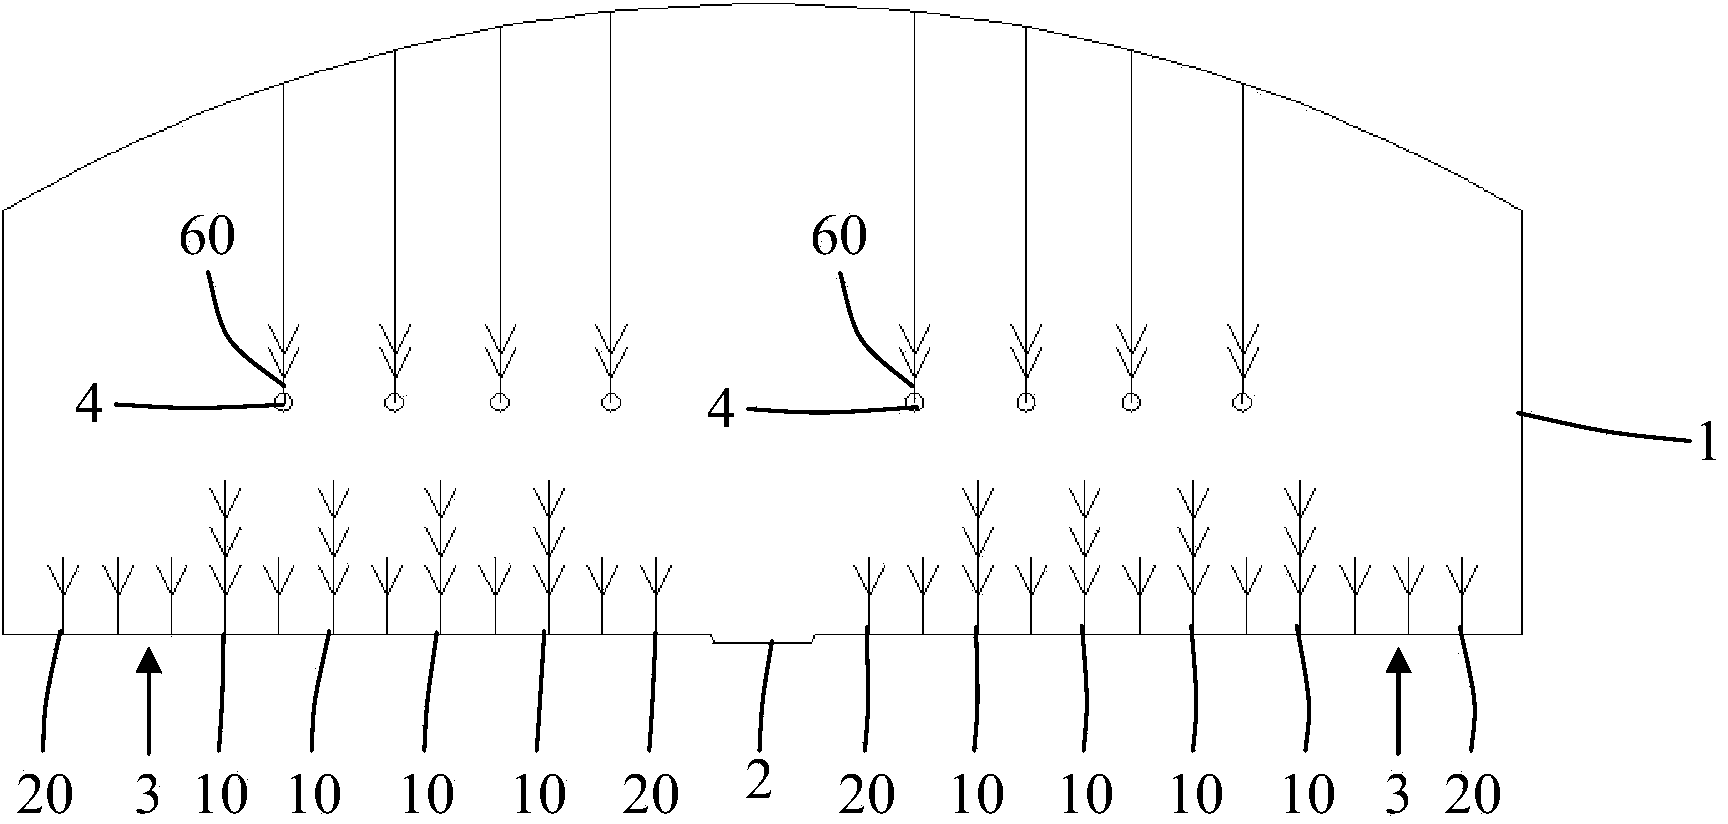 Paddy-upland rotation planting method of greenhouse potherbs